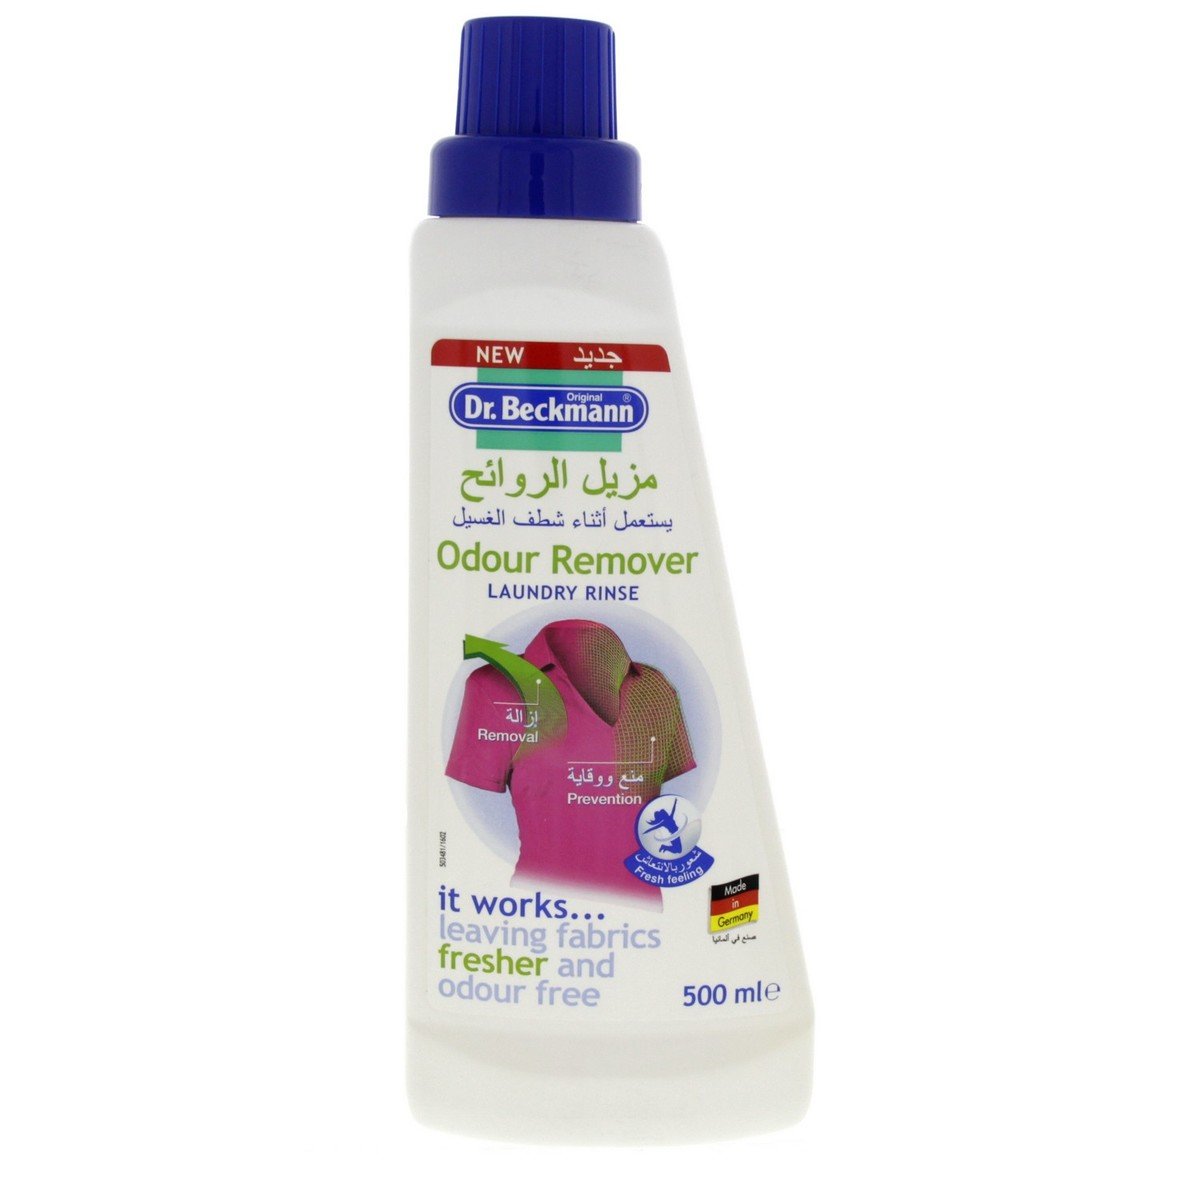 Dr. Beckmann Odour Remover Laundry Rinse 500ml